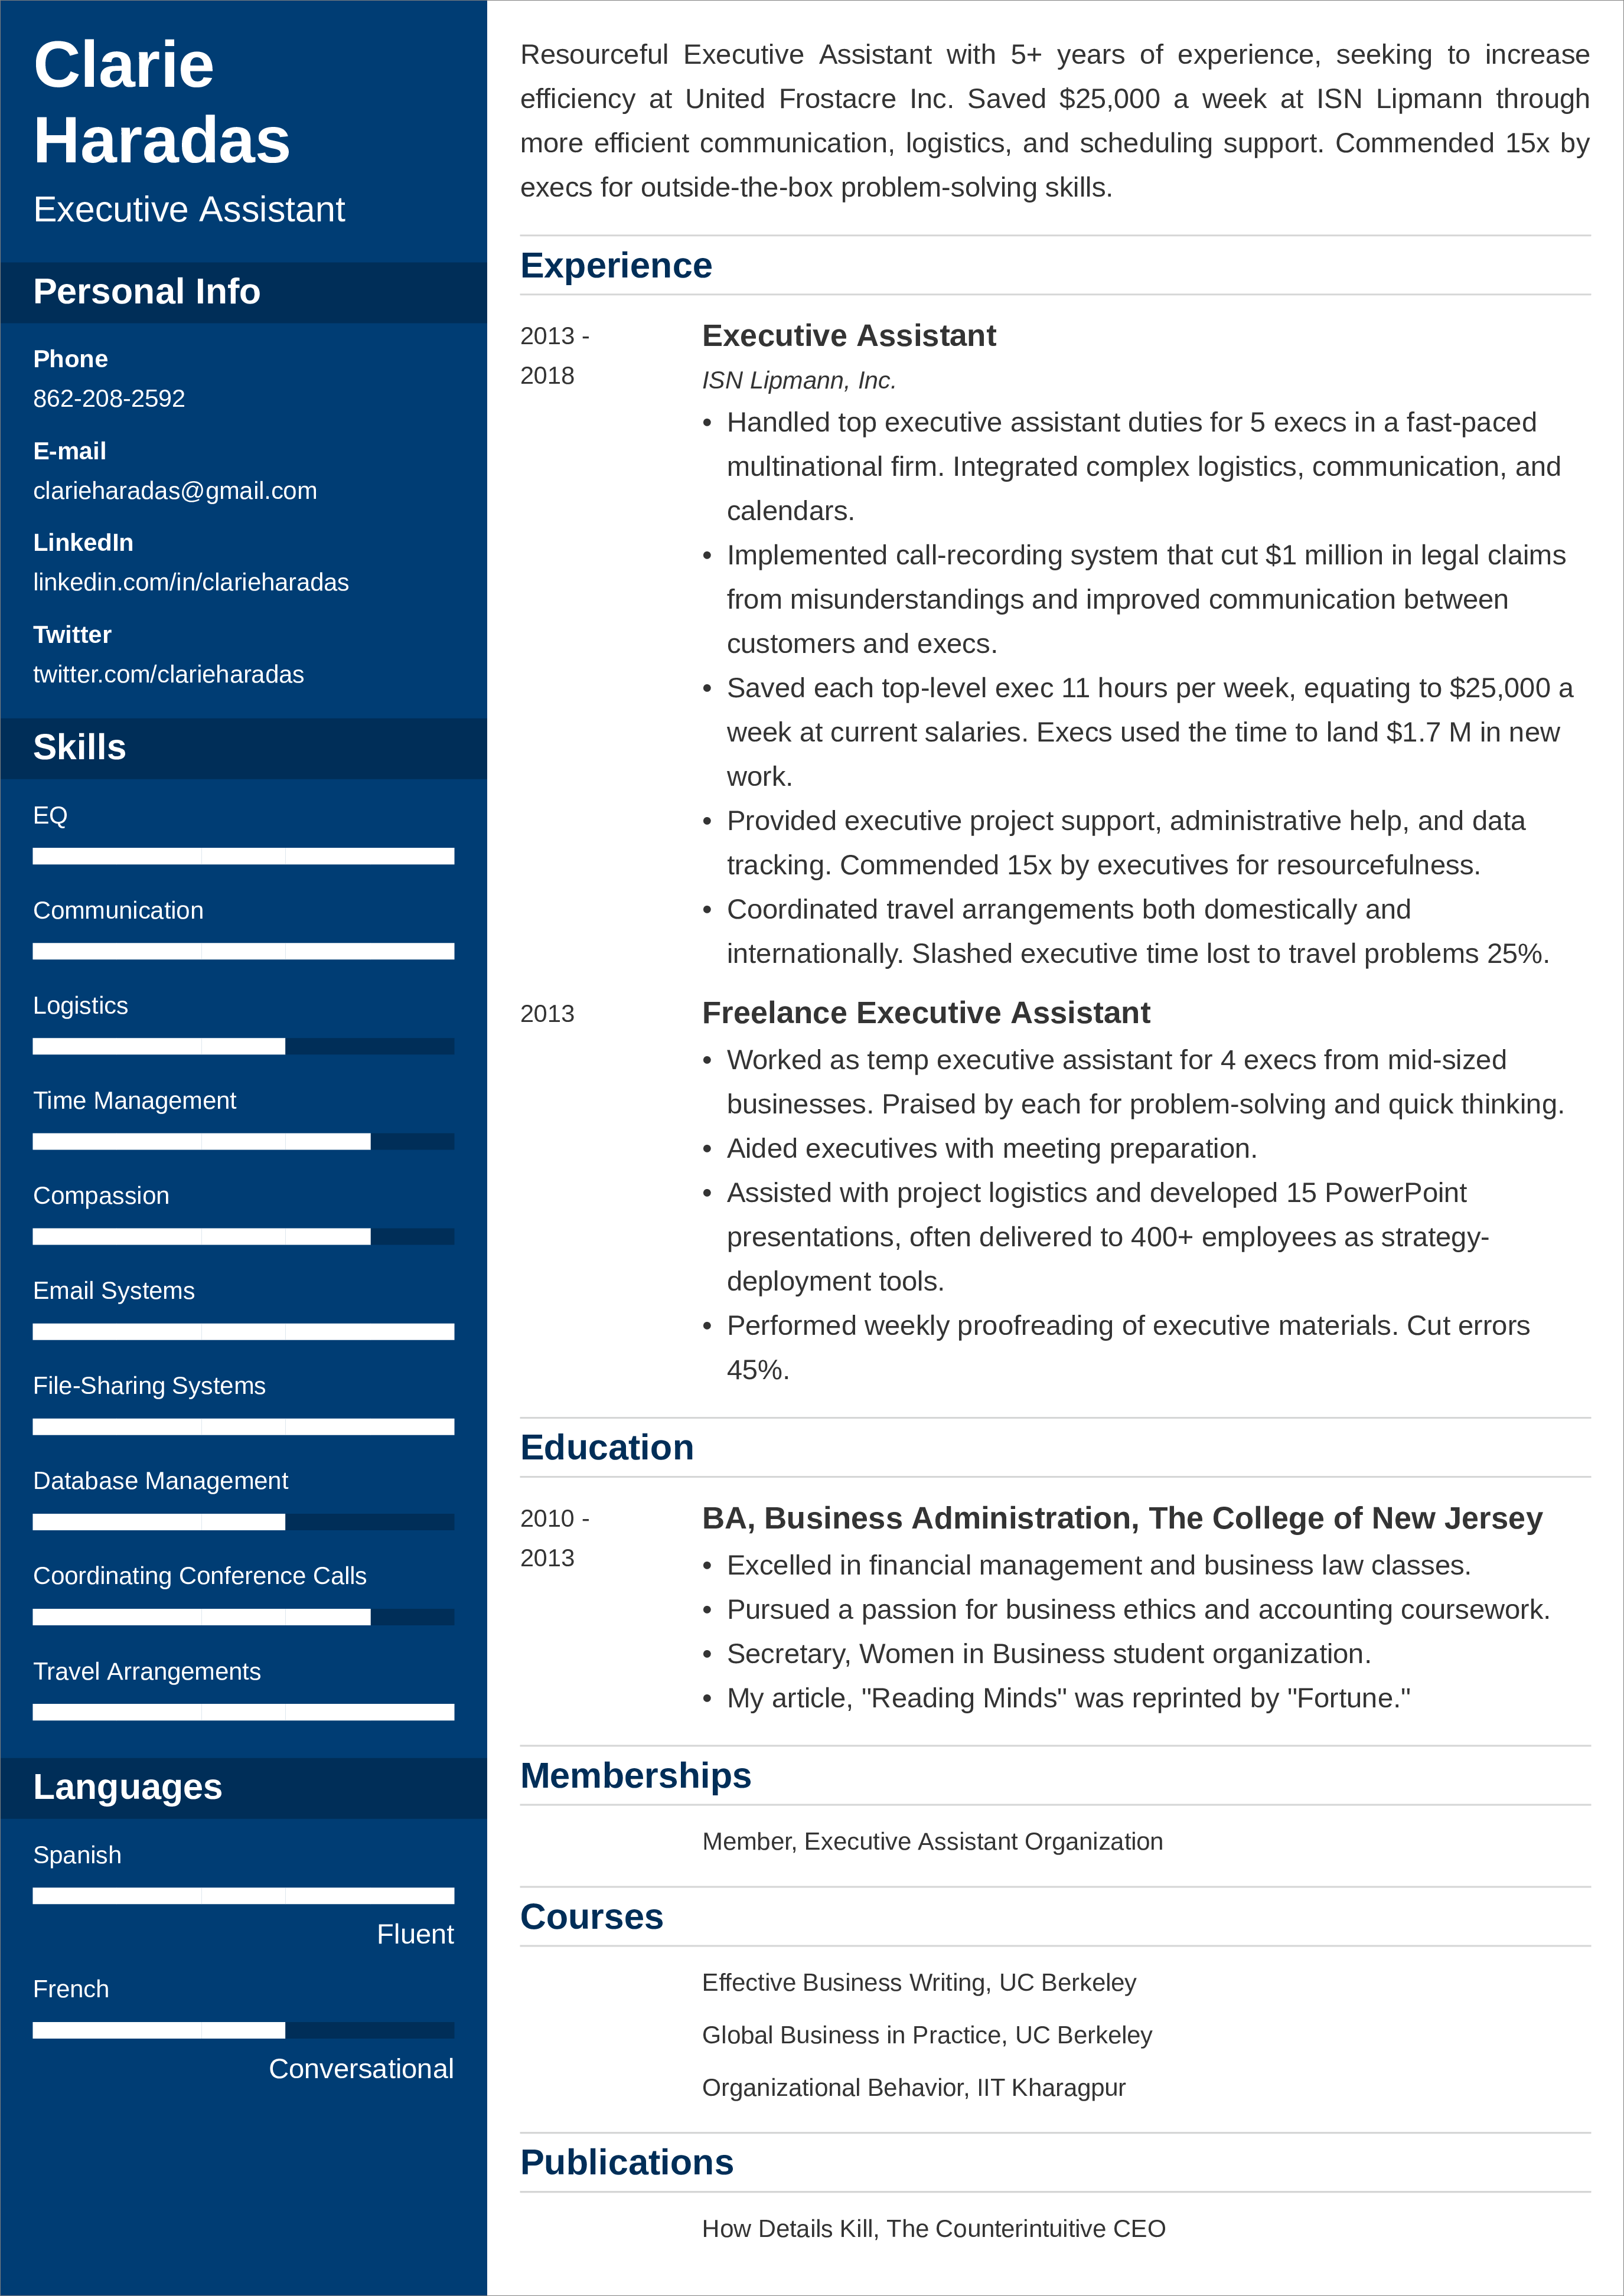 emailing a resume example